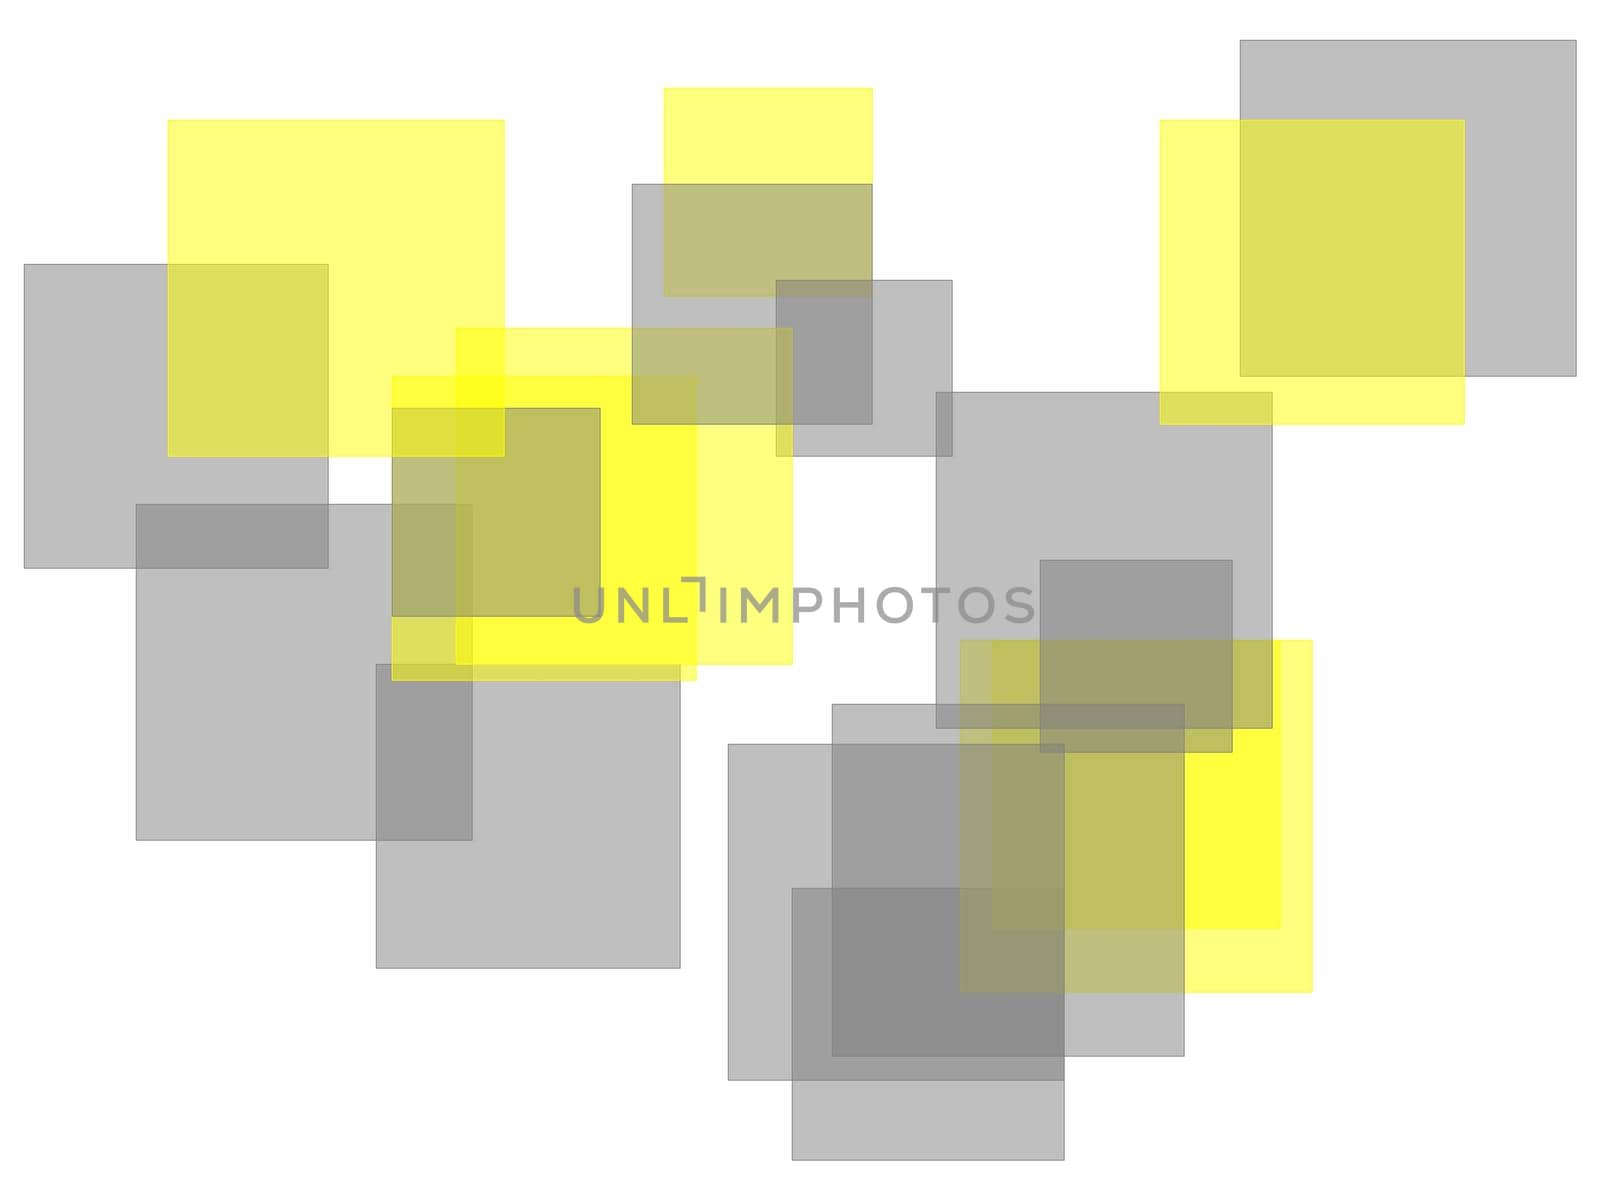 Abstract minimalist grey yellow illustration with squares and white background